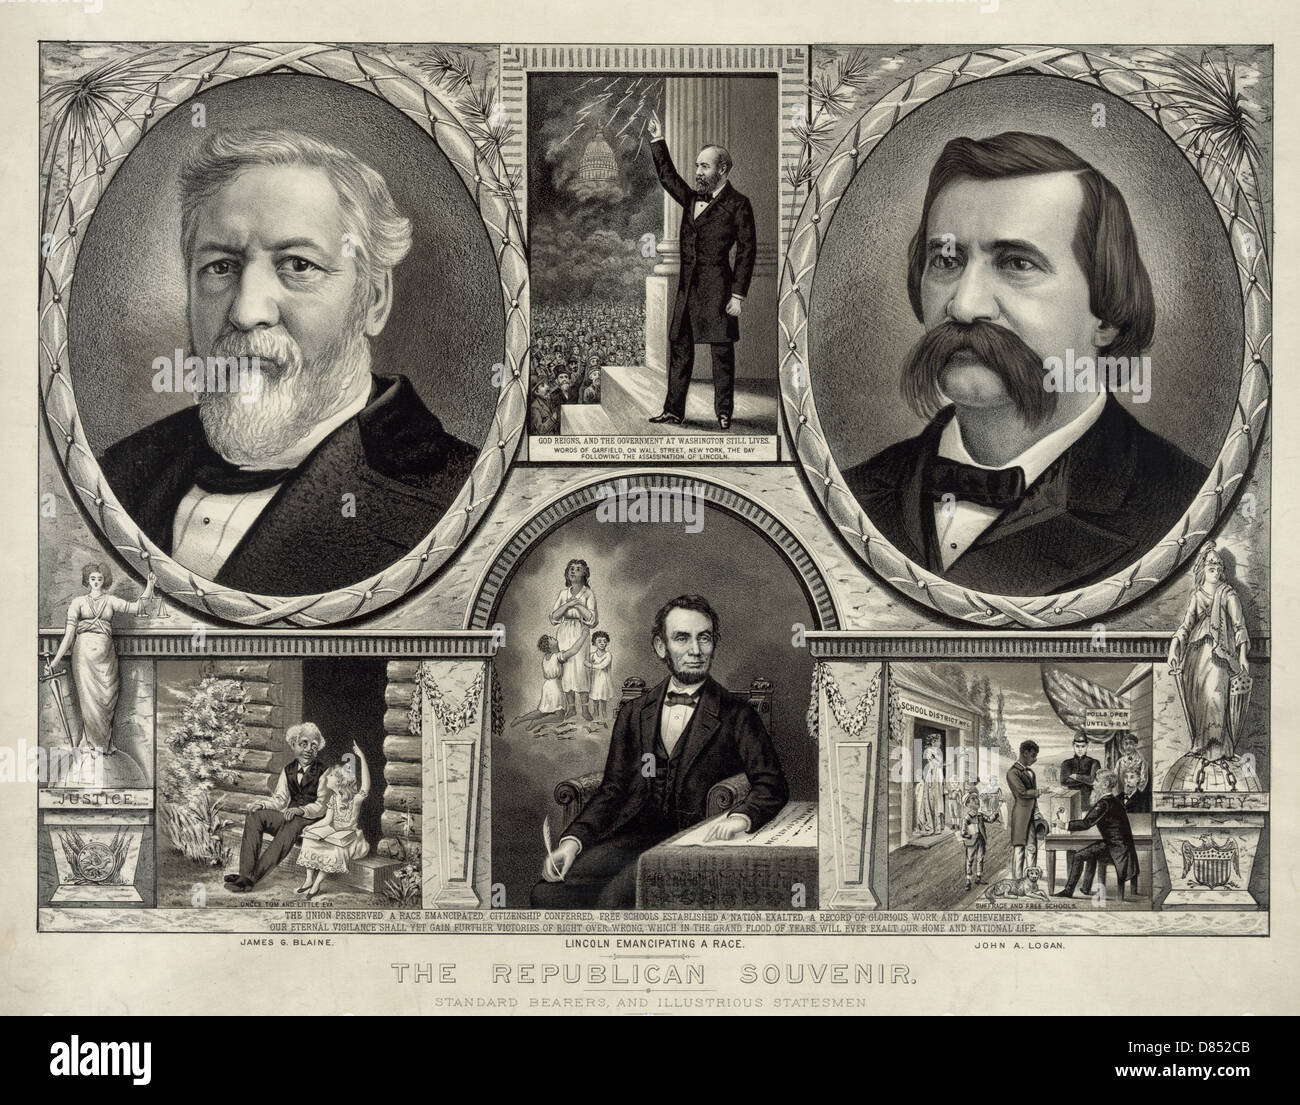 The Republican Souvenir - Campaign poster for Republican candidate for President James Blaine and running mate John Logan in 1884 USA presidential election Stock Photo